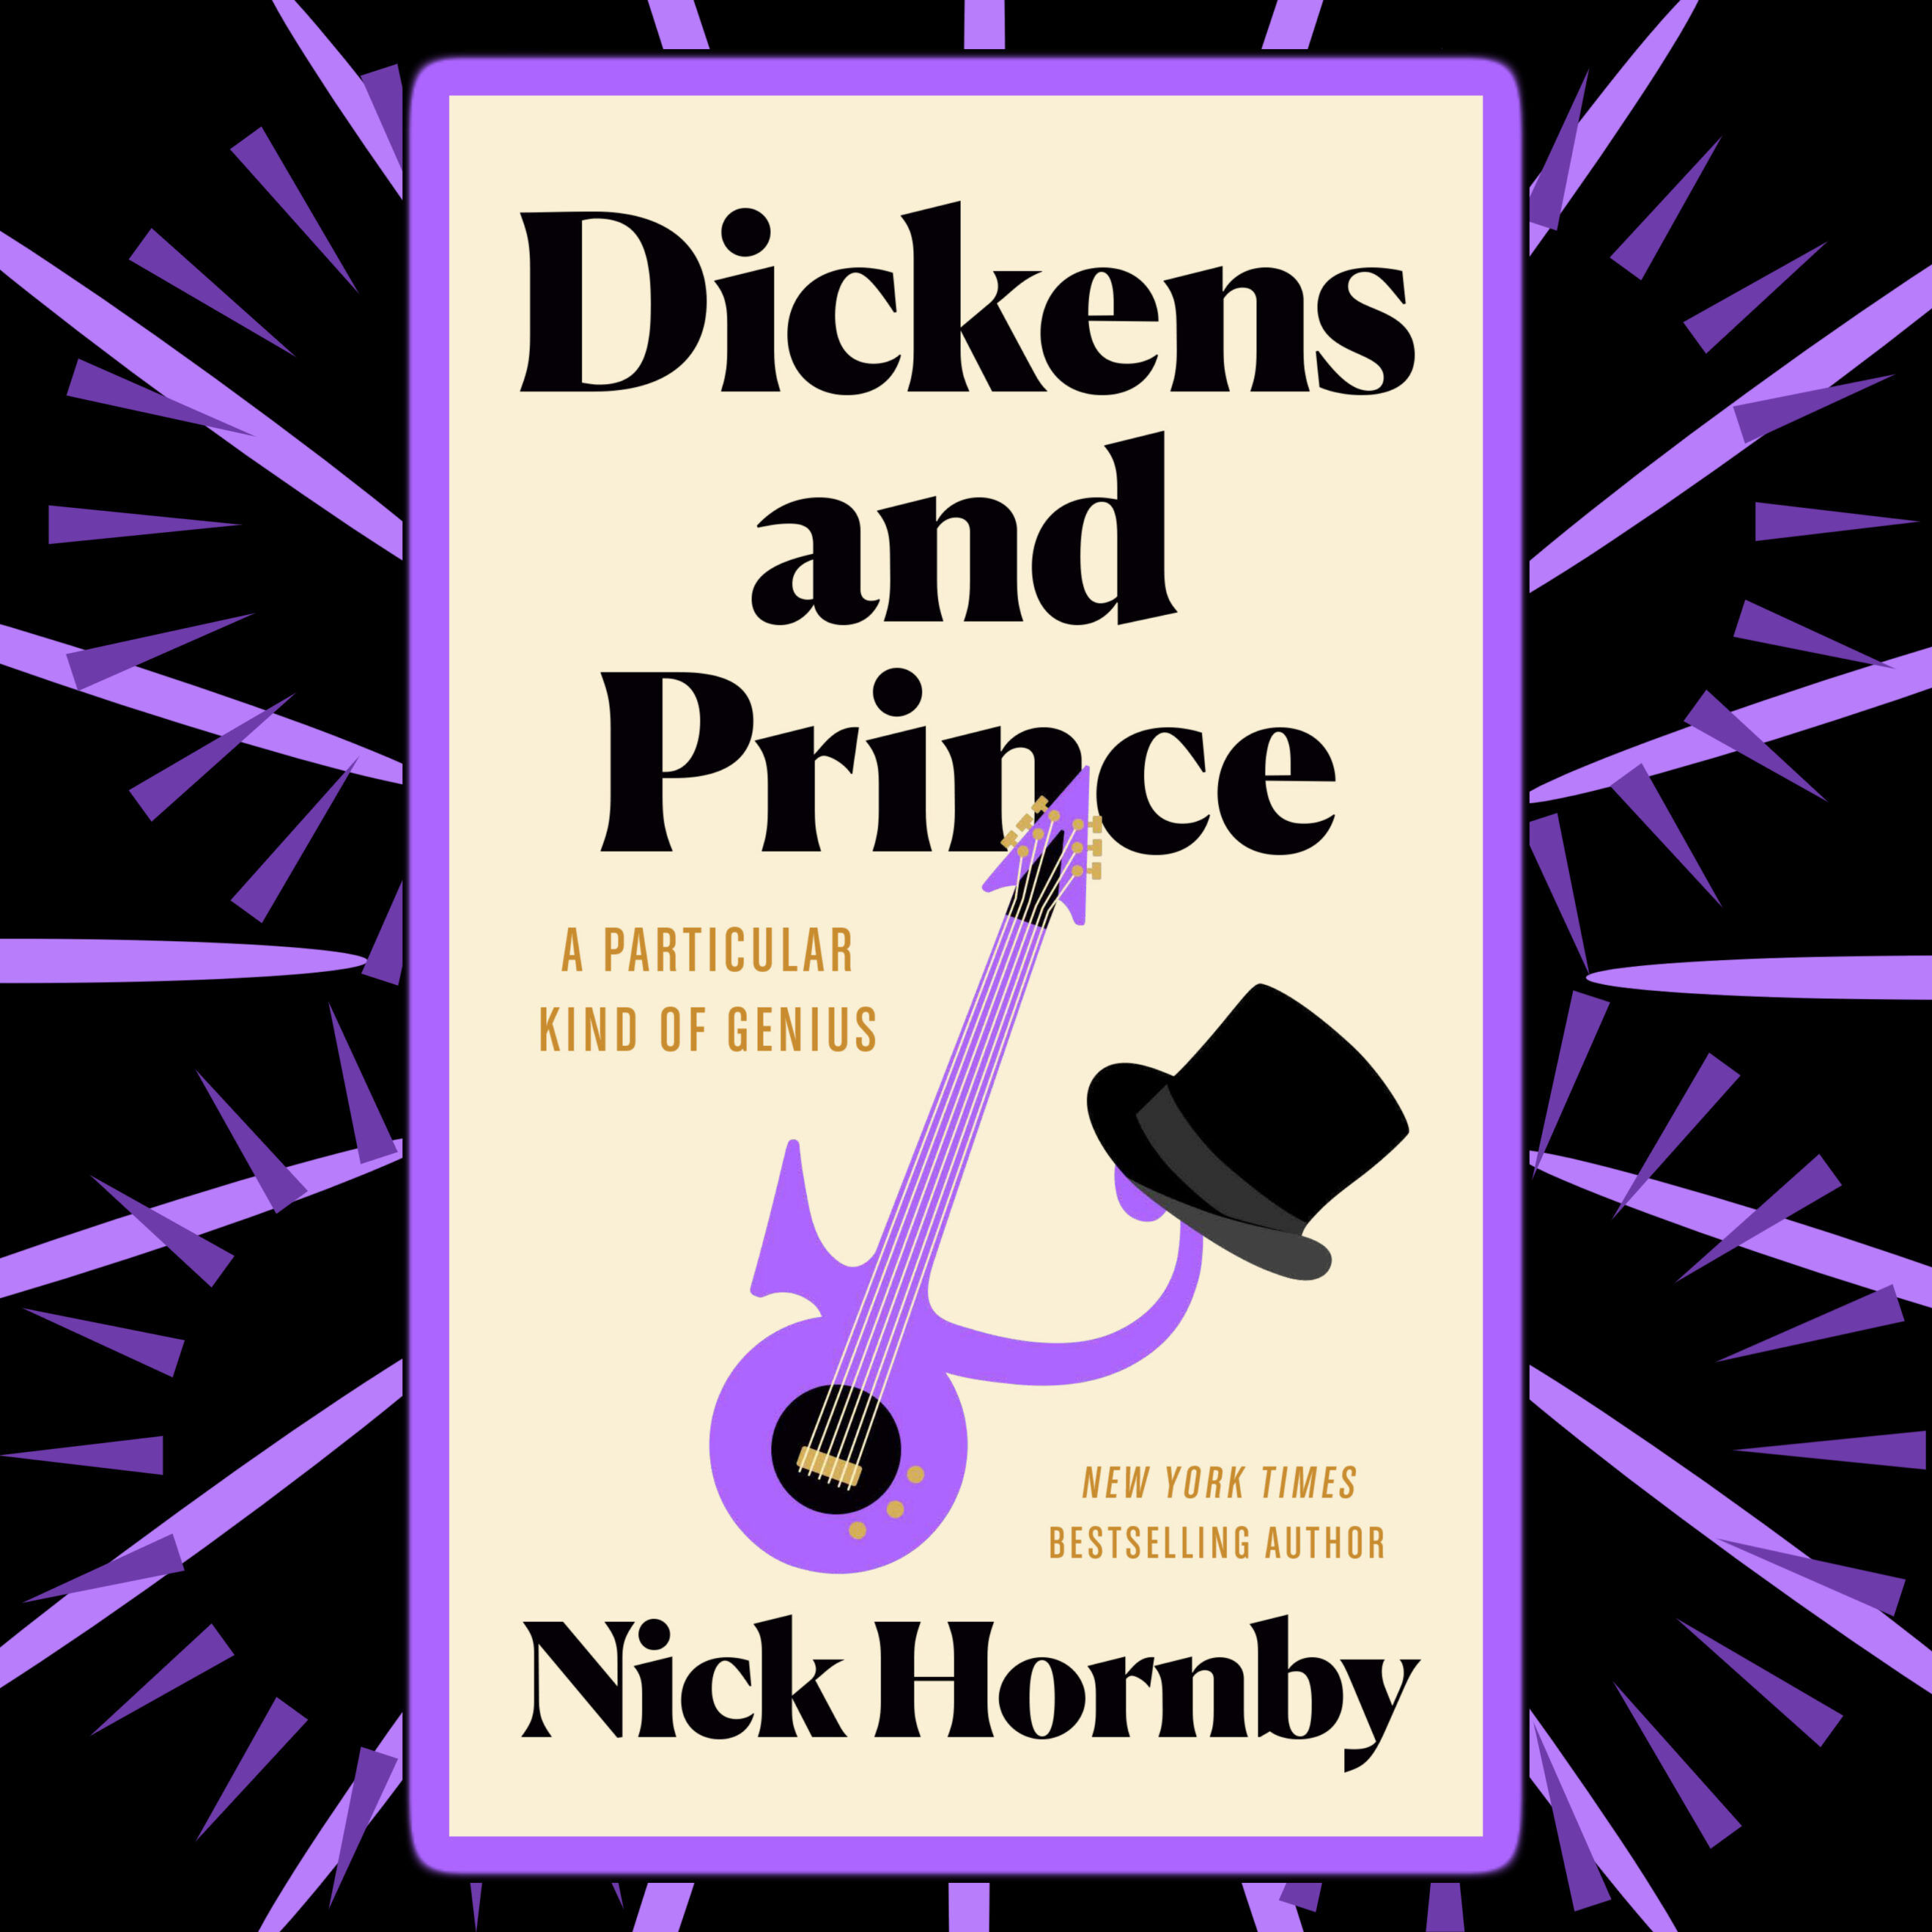 1796 - Nick Hornby - Dickens and Prince | The Book Show